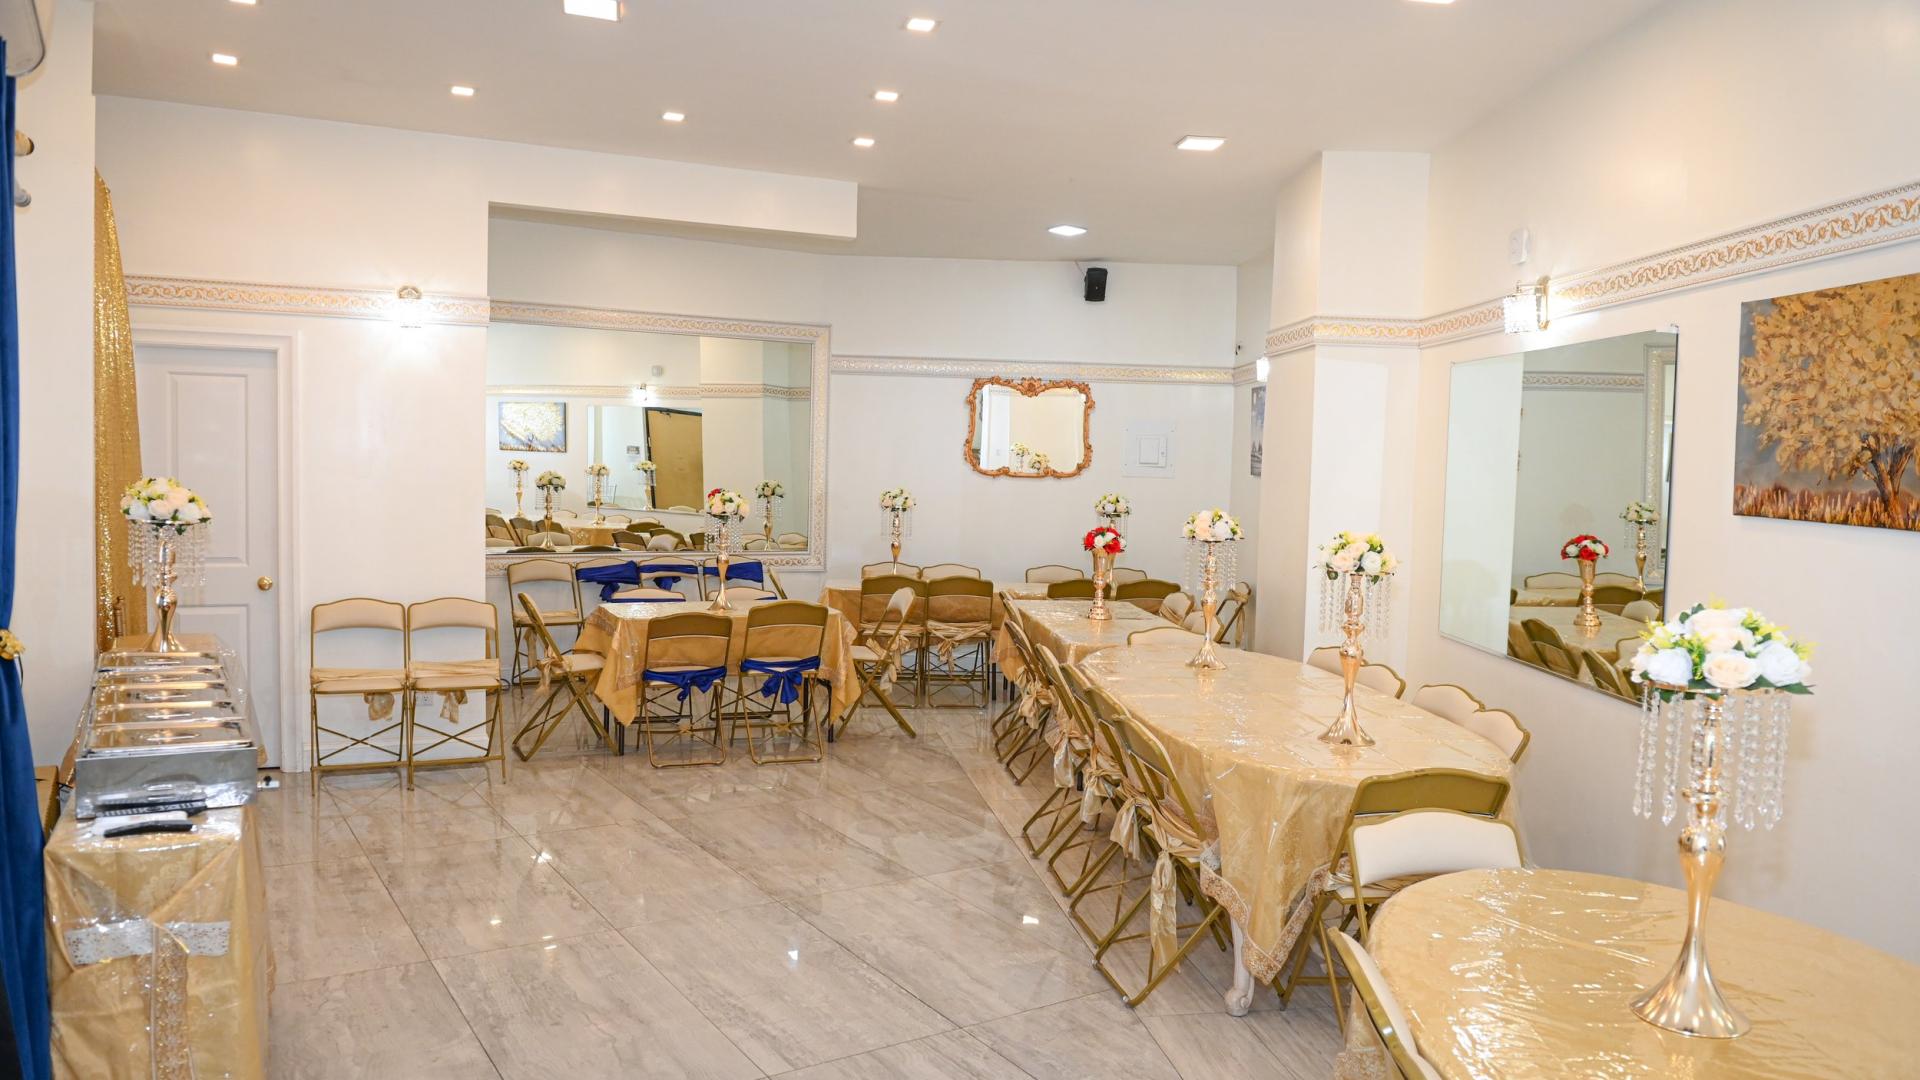 Banquet Halls for Rent in Brooklyn, NY